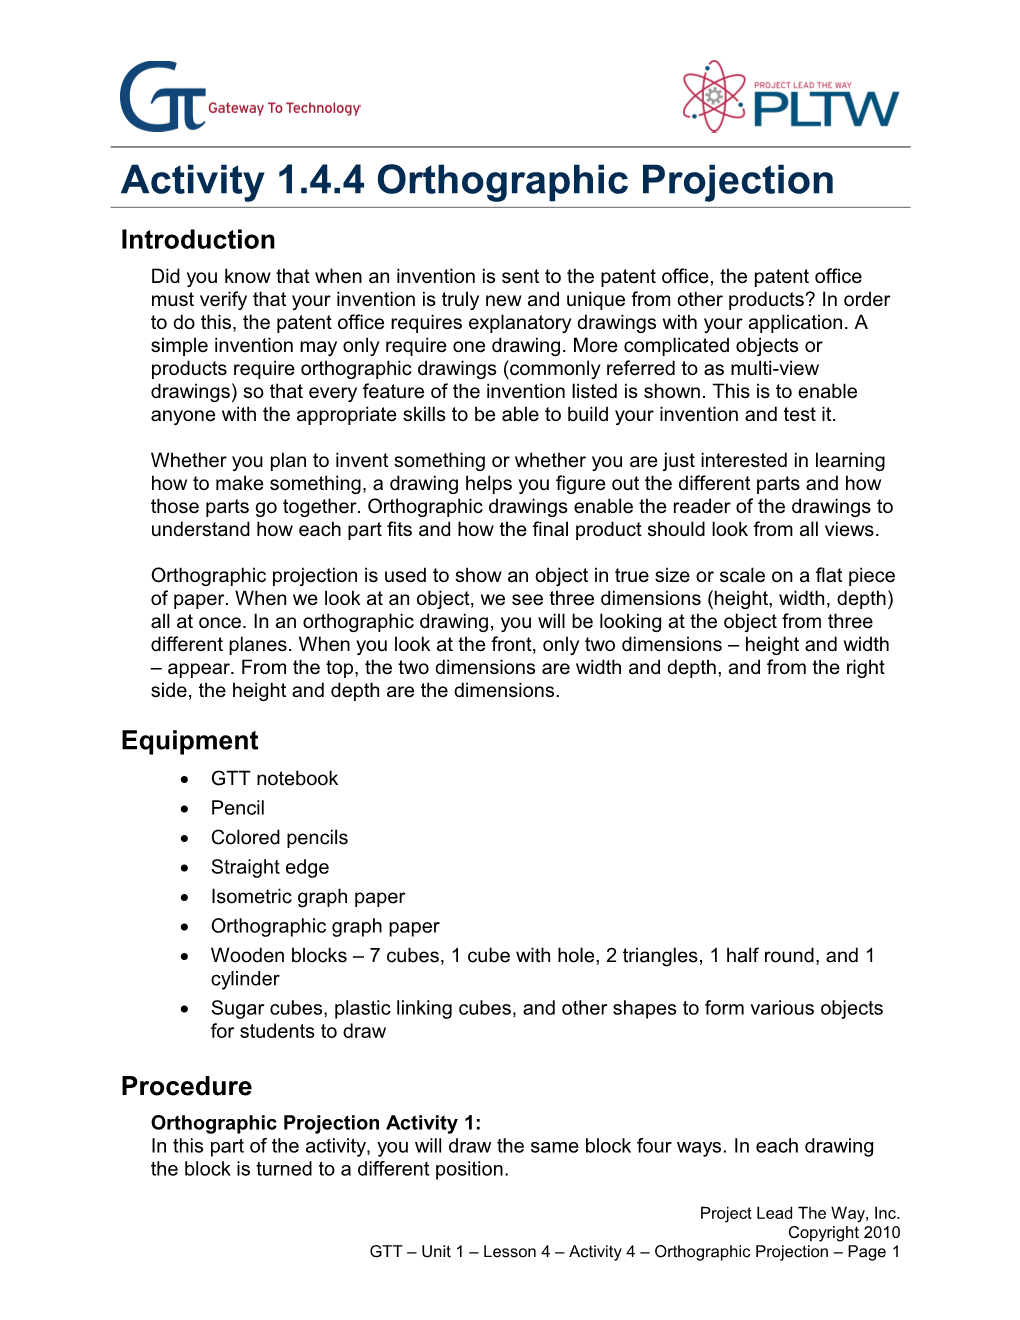 Activity 1.4.4 Orthographic Projection